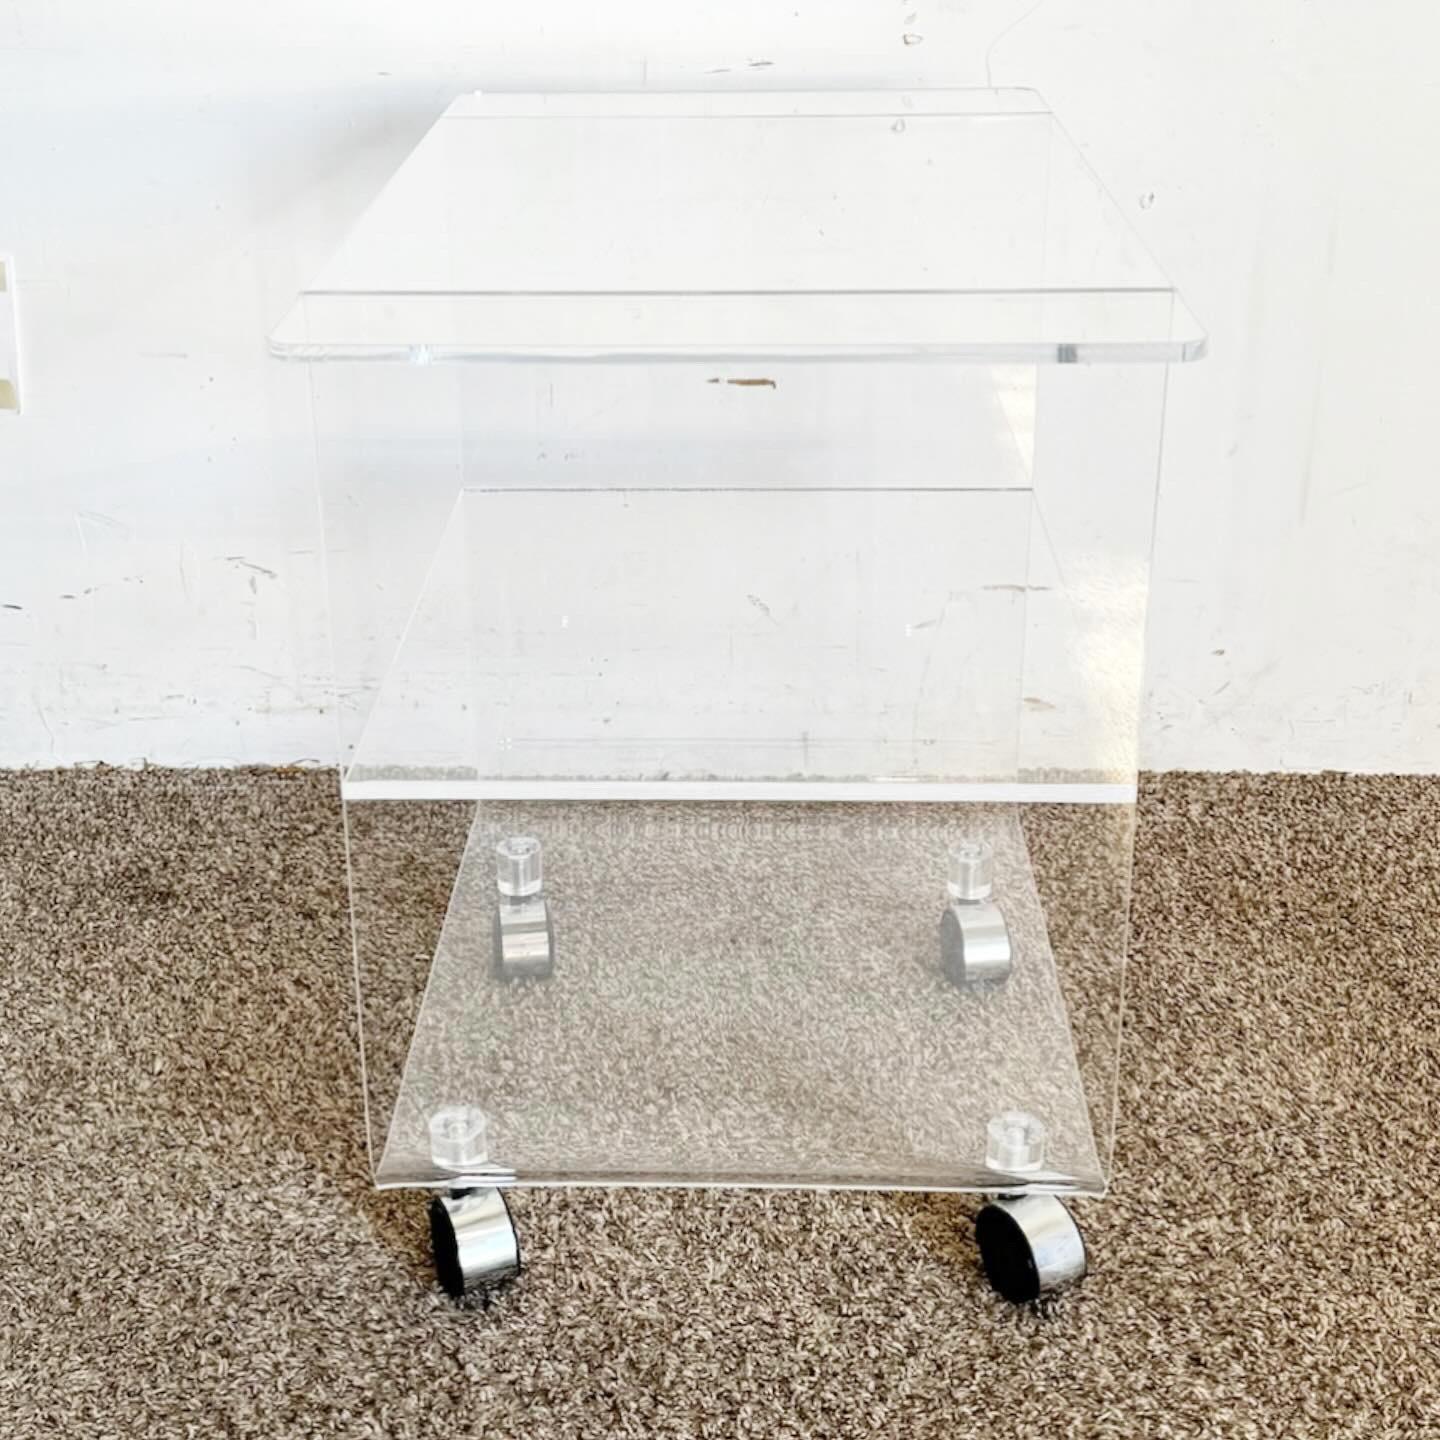 Add a touch of elegance to your hosting with the Postmodern Three Tier Lucite Bar Cart. This chic, transparent cart embodies minimalist postmodern design, offering three spacious tiers for your bottles and accessories. Its smooth mobility and airy